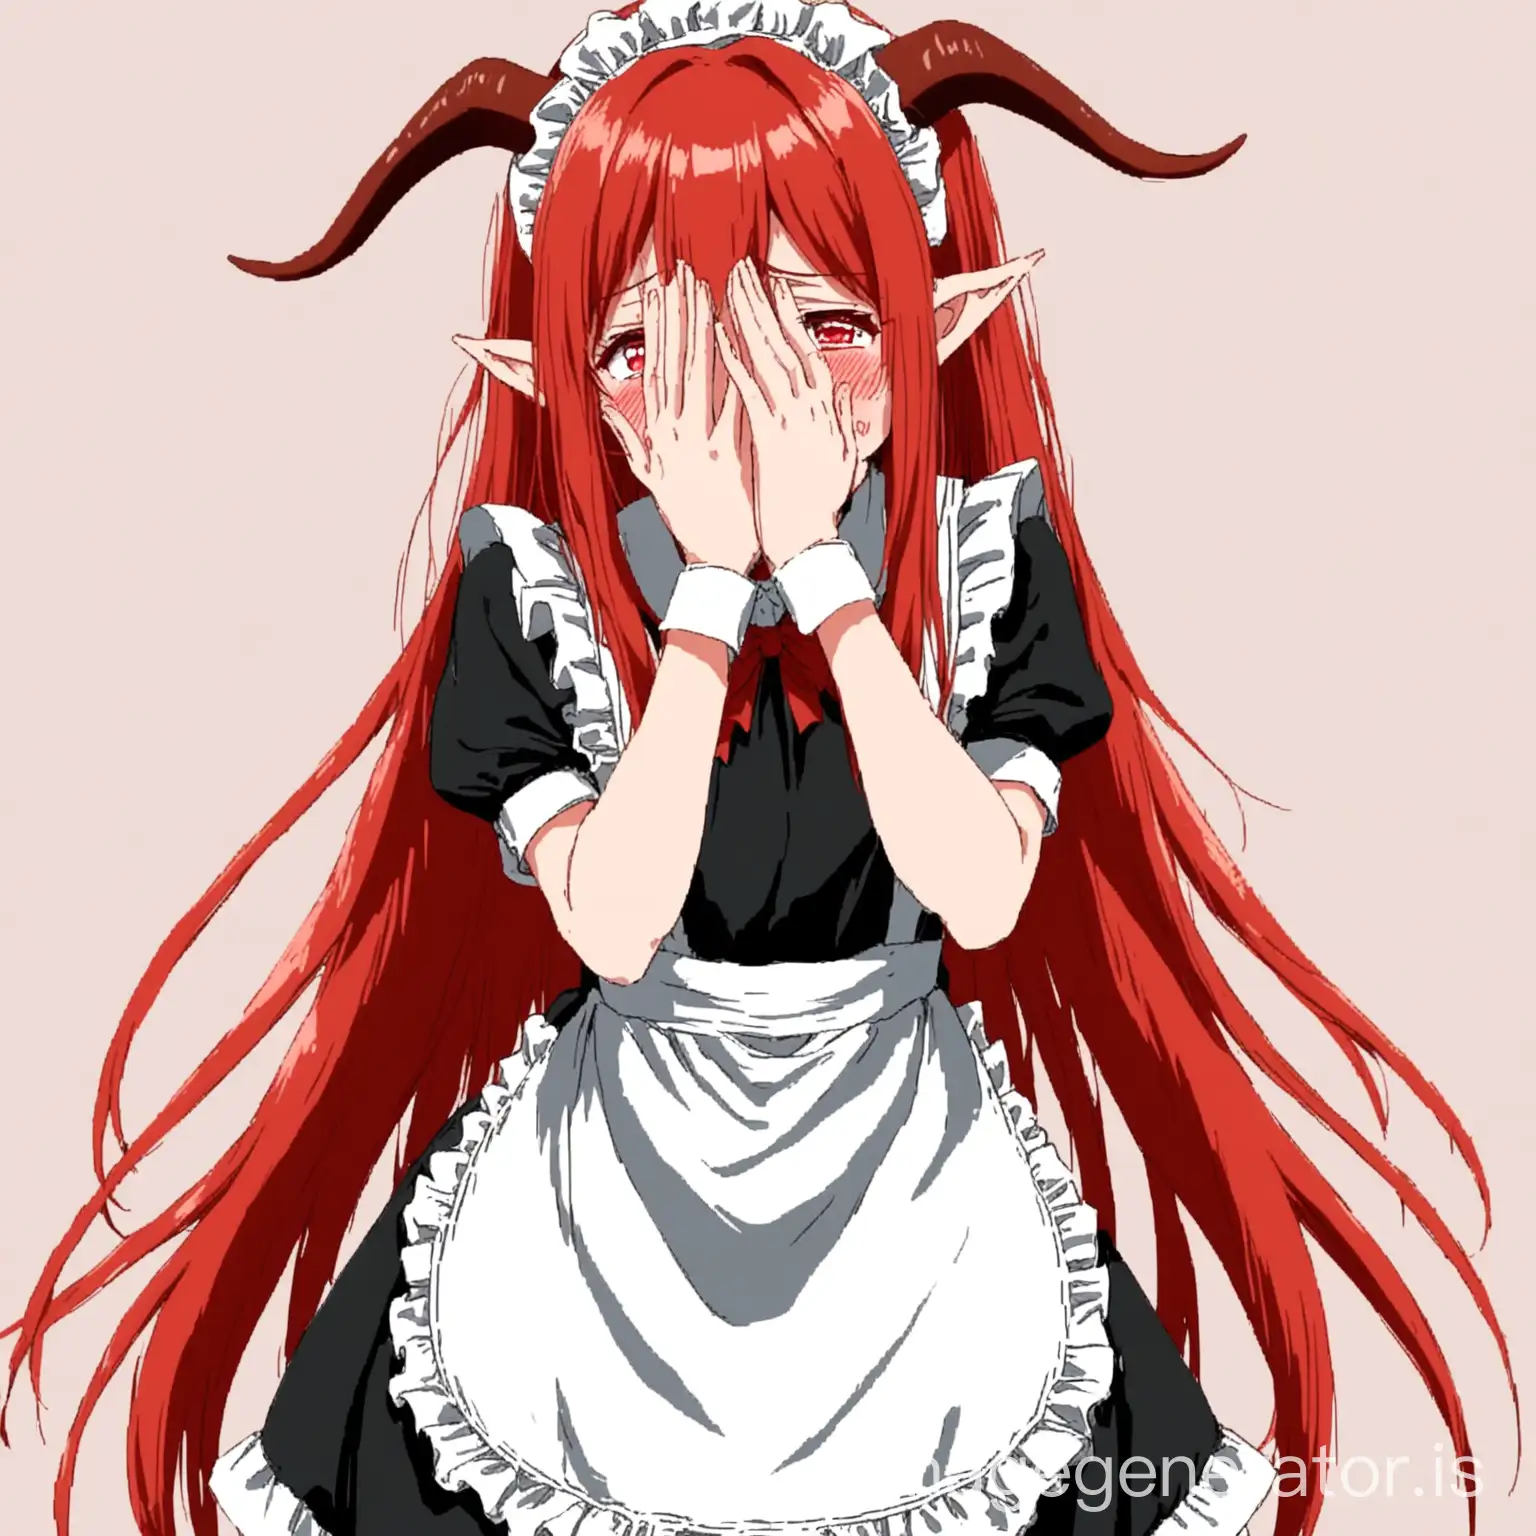 Anime girl with elf ears and small skin colored horns. Red long hair. Maid outfit. Collar. Covering face with both hands with blush. Flustered red blush. Embarrassed pose. Full body in picture.